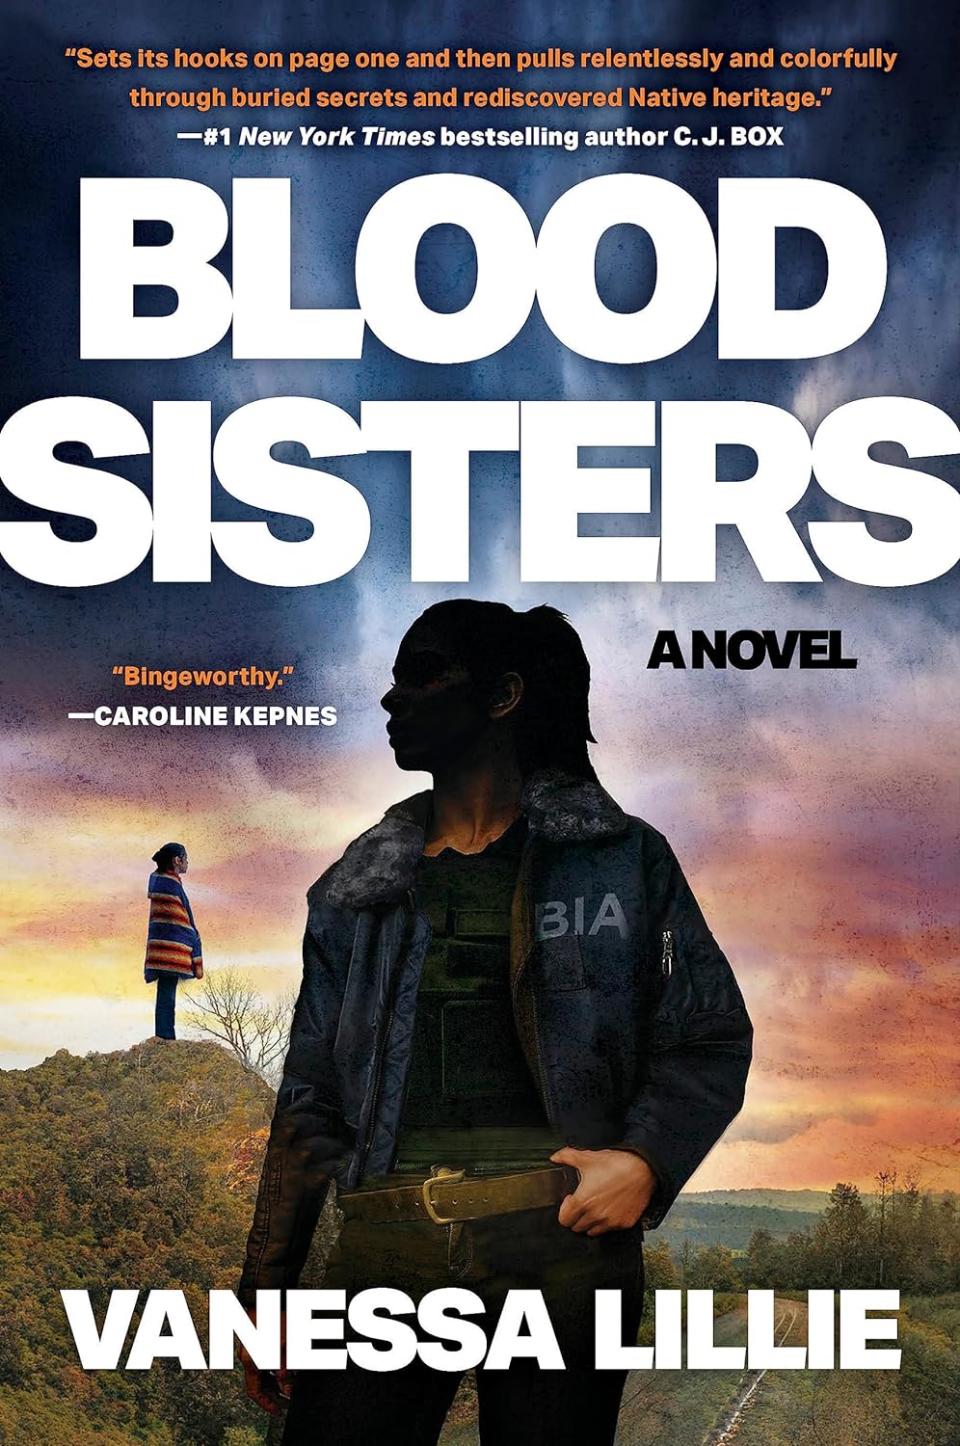 "Blood Sisters" by Vanessa Lillie